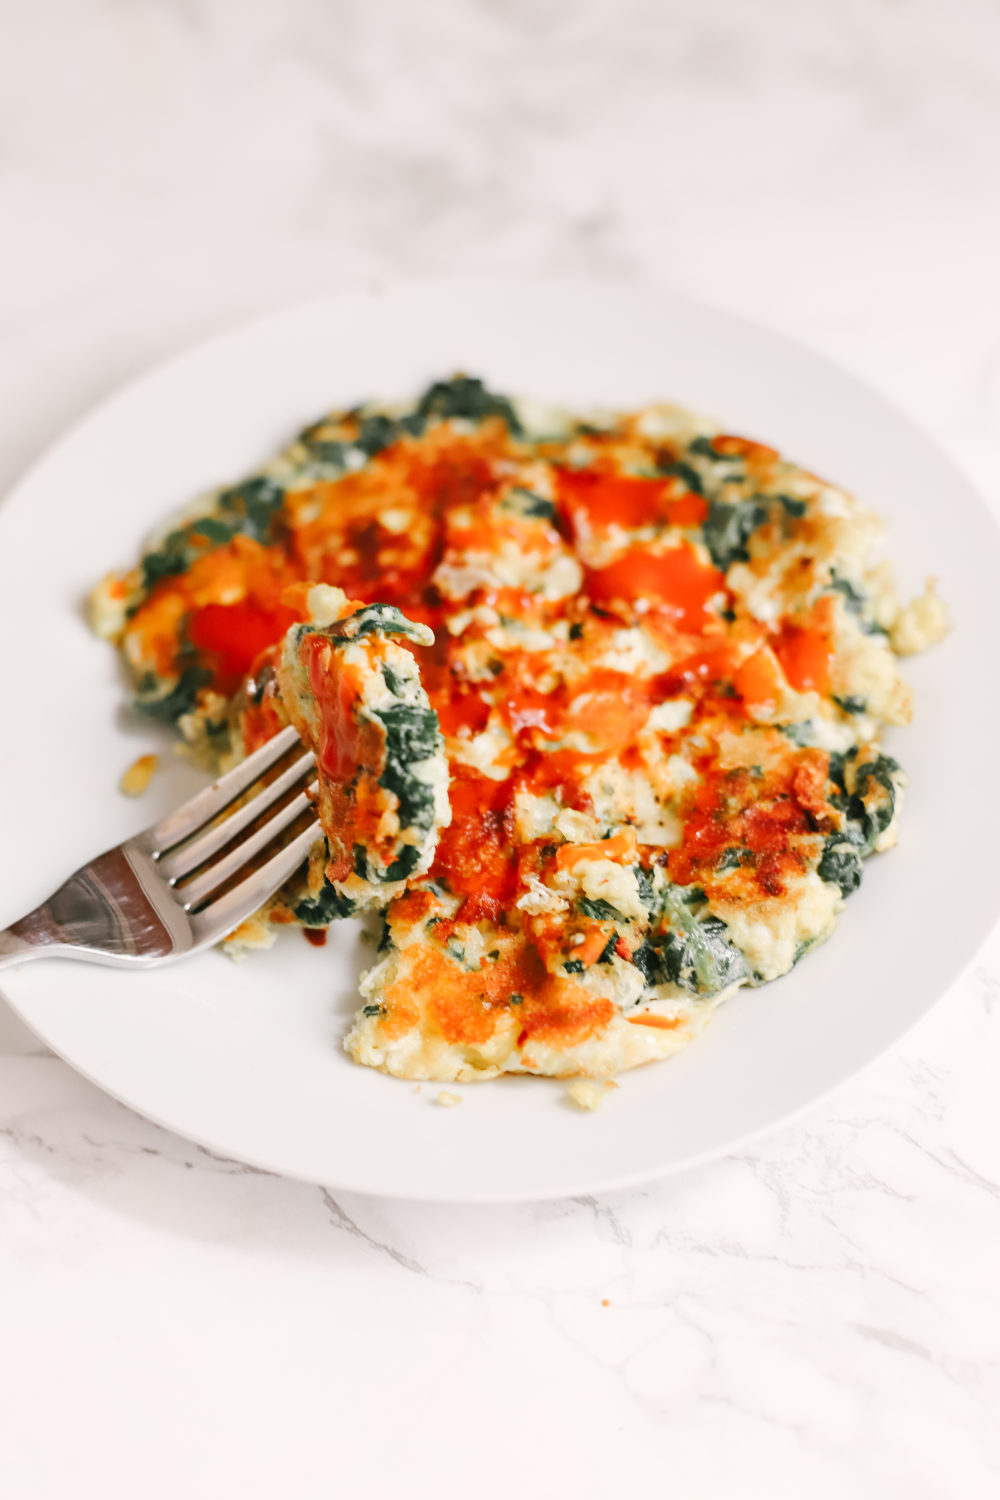 An egg frittata naturally low in carbs and keto friendly. A quick breakfast for every morning or after intermittent fasting, as it will aid in weight loss. Ketogenic | Fried Egg | Omelette | Spinach and Eggs | Spinach and Cheese | Breakfast | Brunch | Gluten-Free | Low carbs | Atkins | Easy | Weight Loss | Burn Fat | Healthy Recipes | Veggies | 